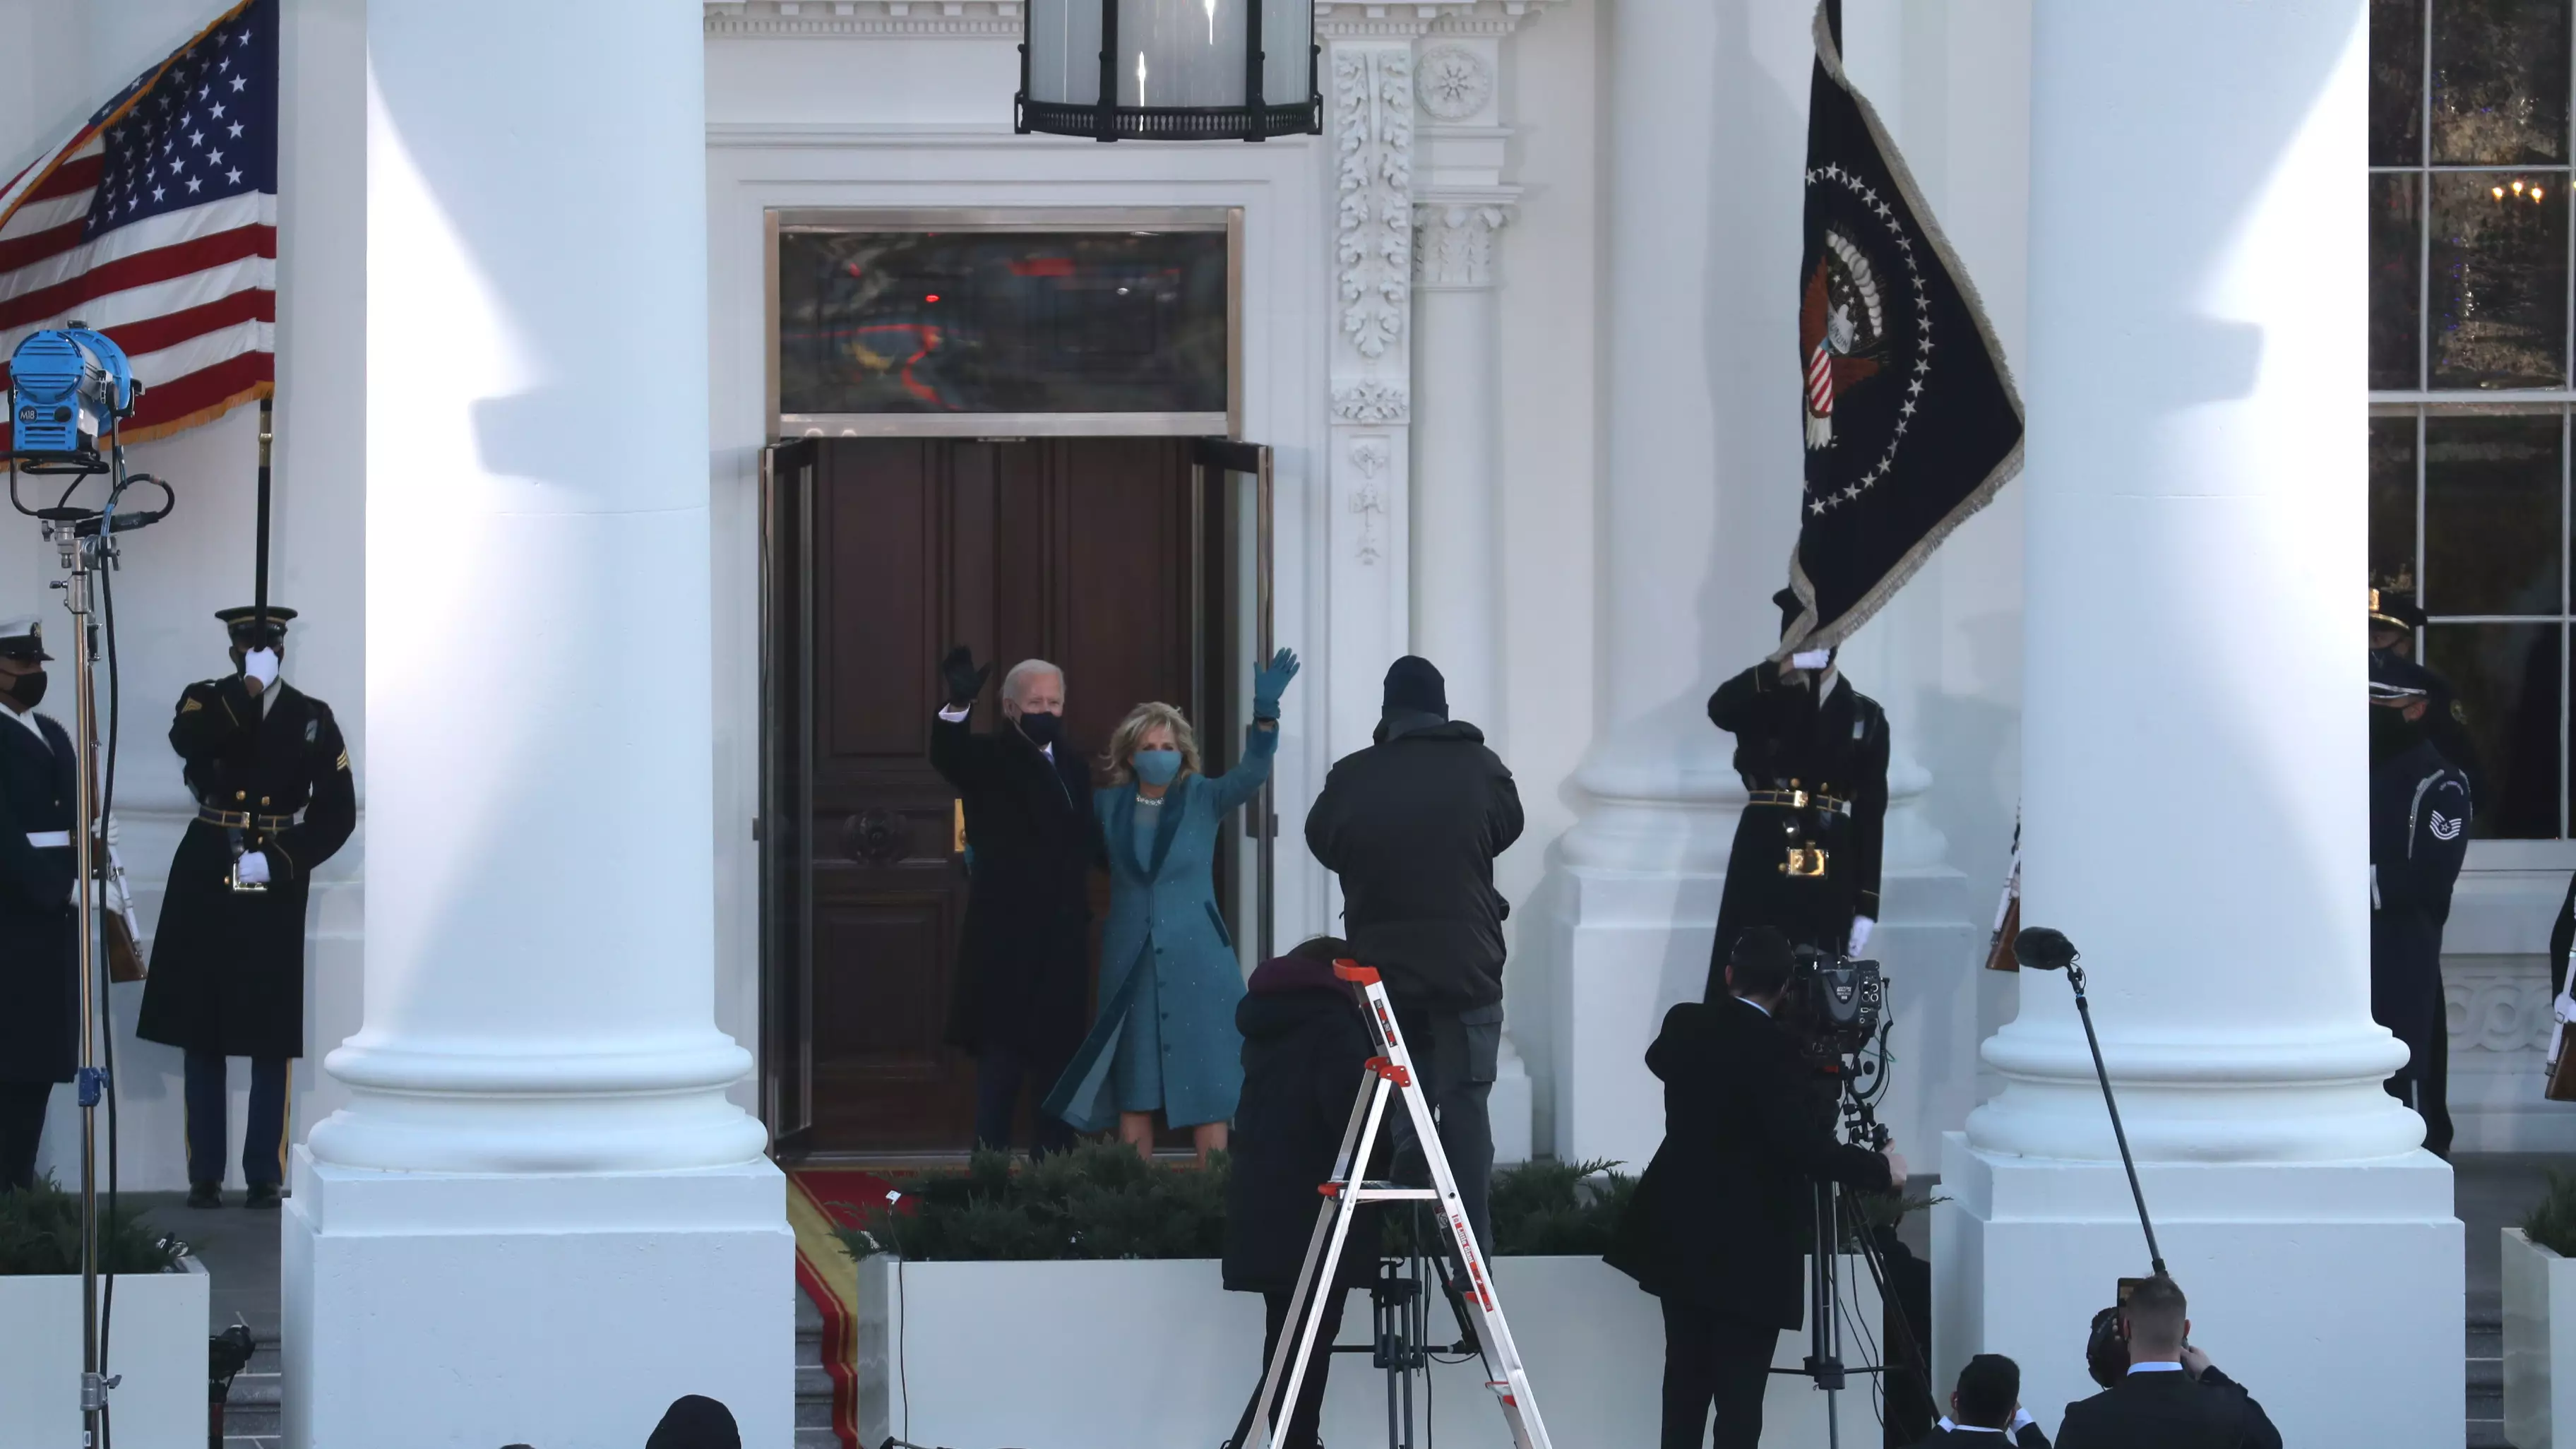 Joe And Jill Biden Left Standing In The Cold After White House Door Mix-Up